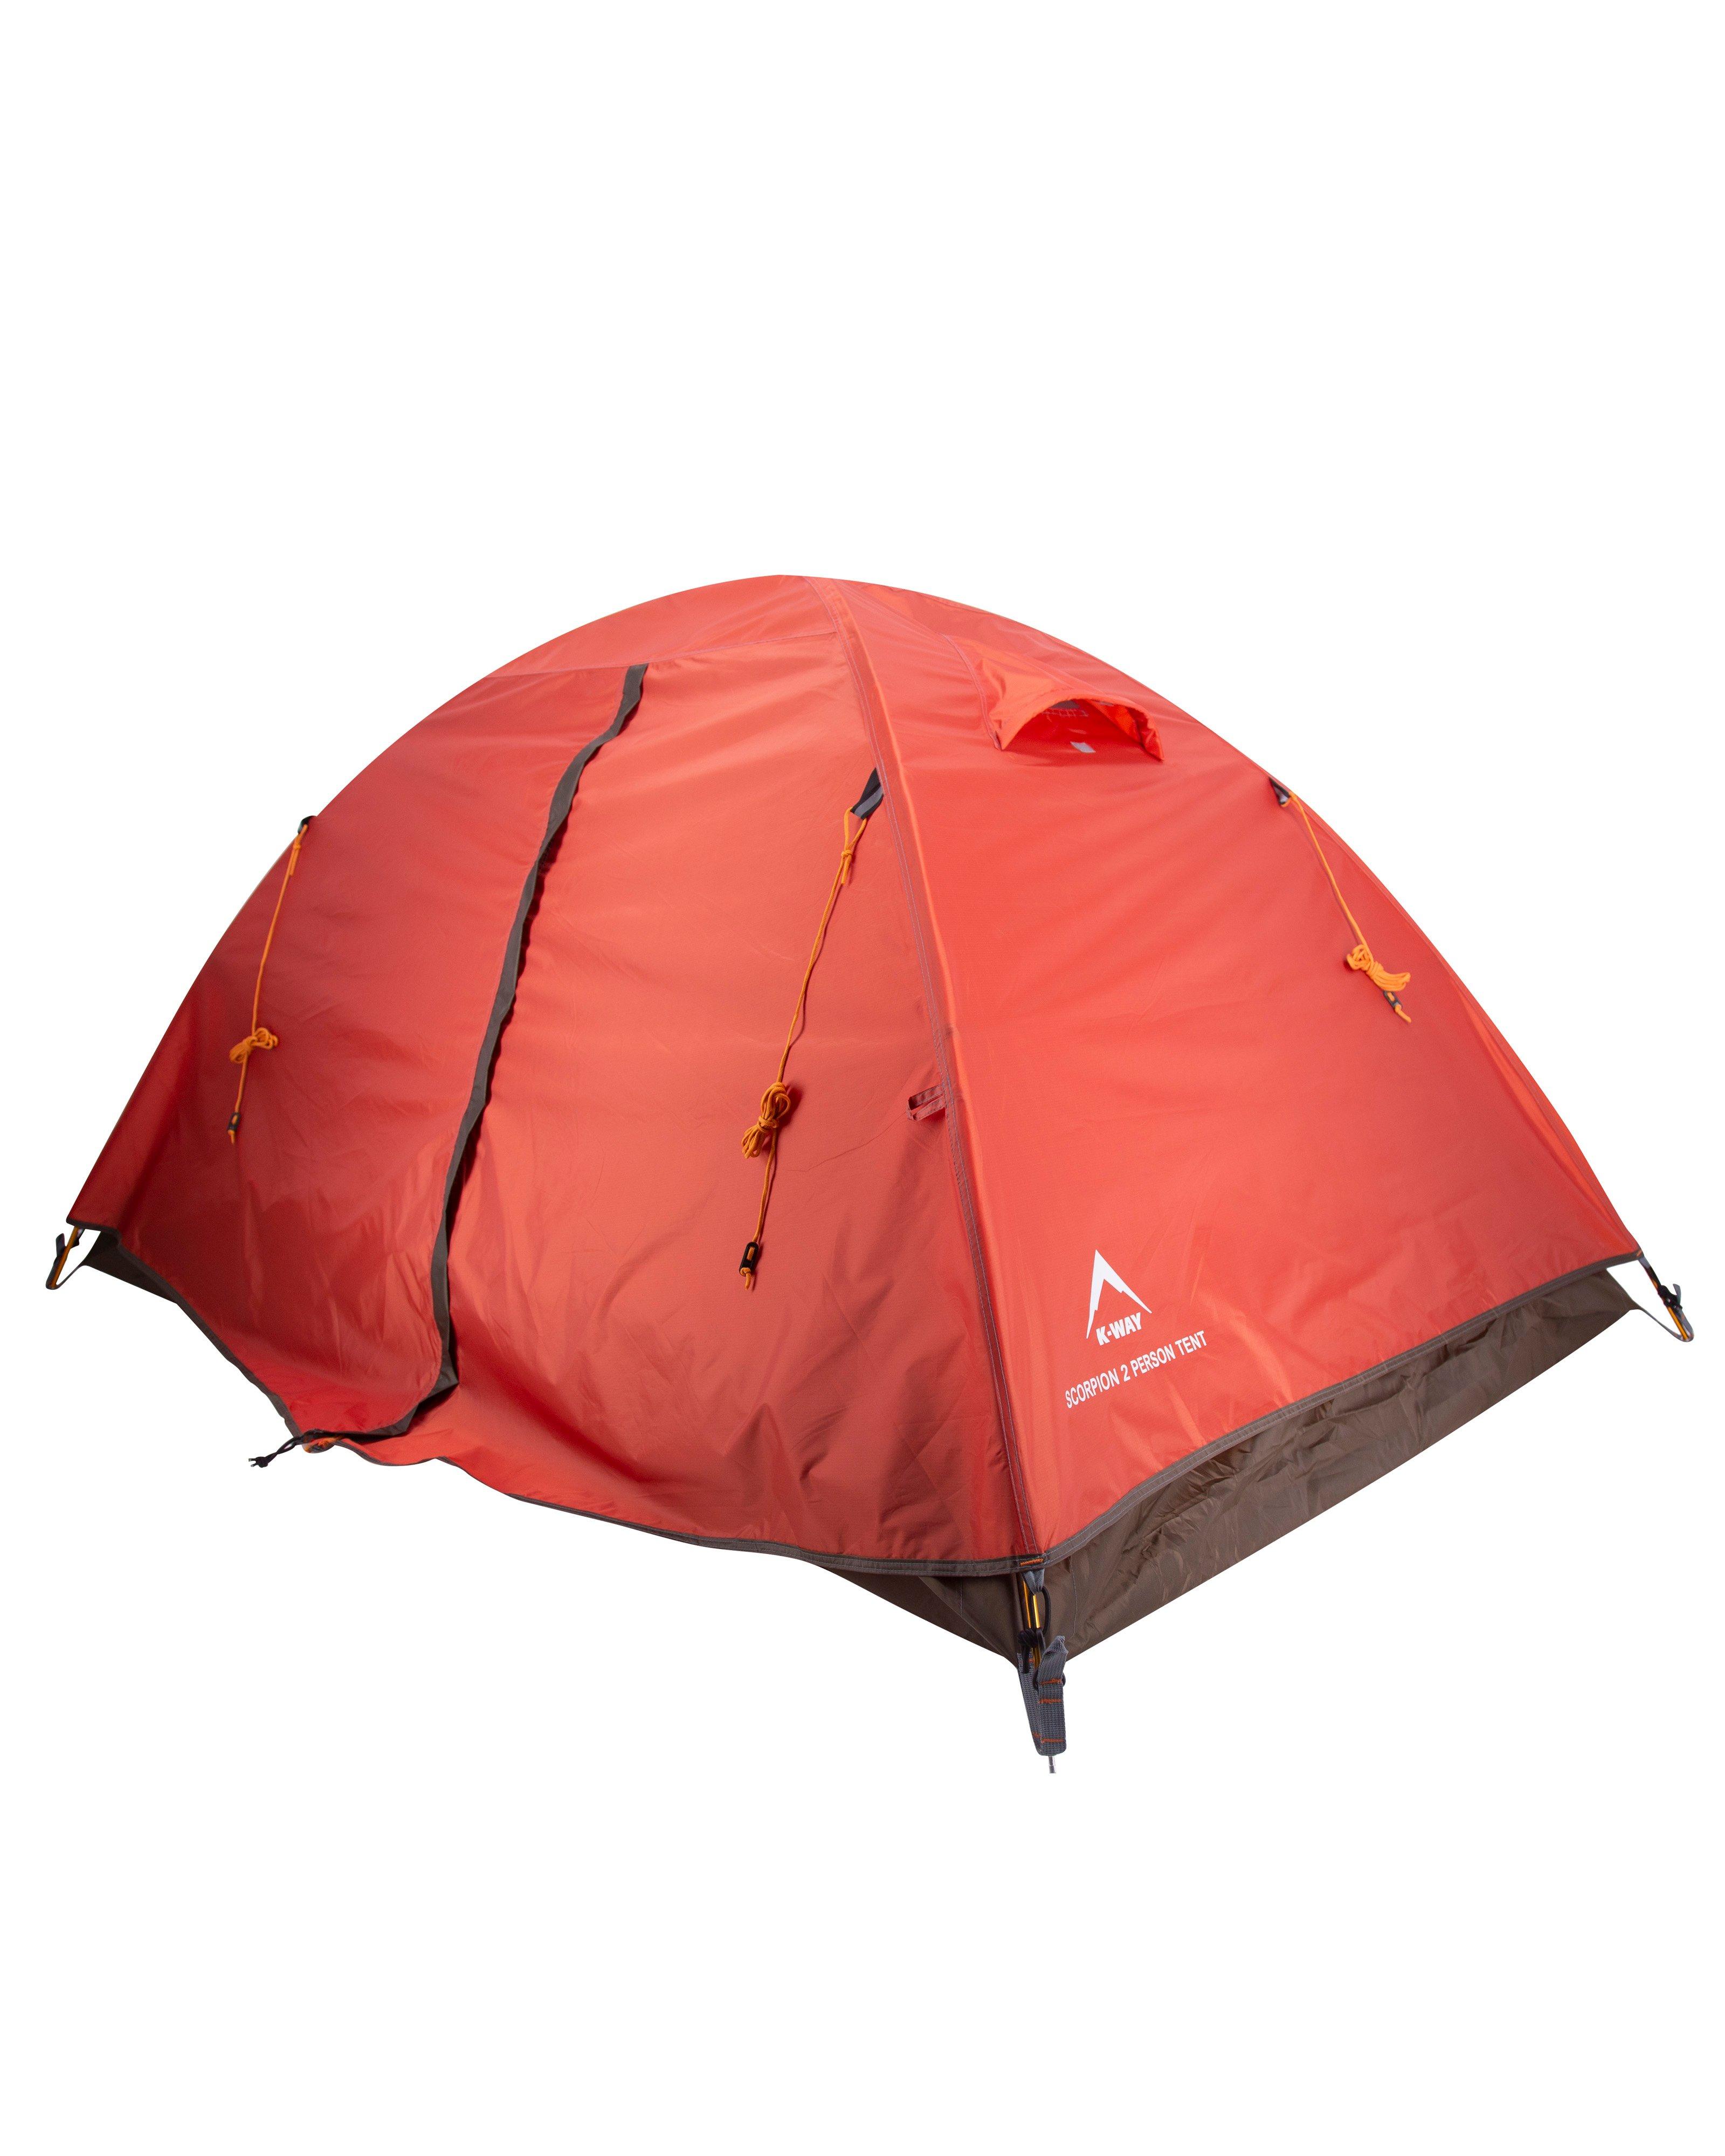 K-Way Scorpion 2 Person Hiking Tent -  Red